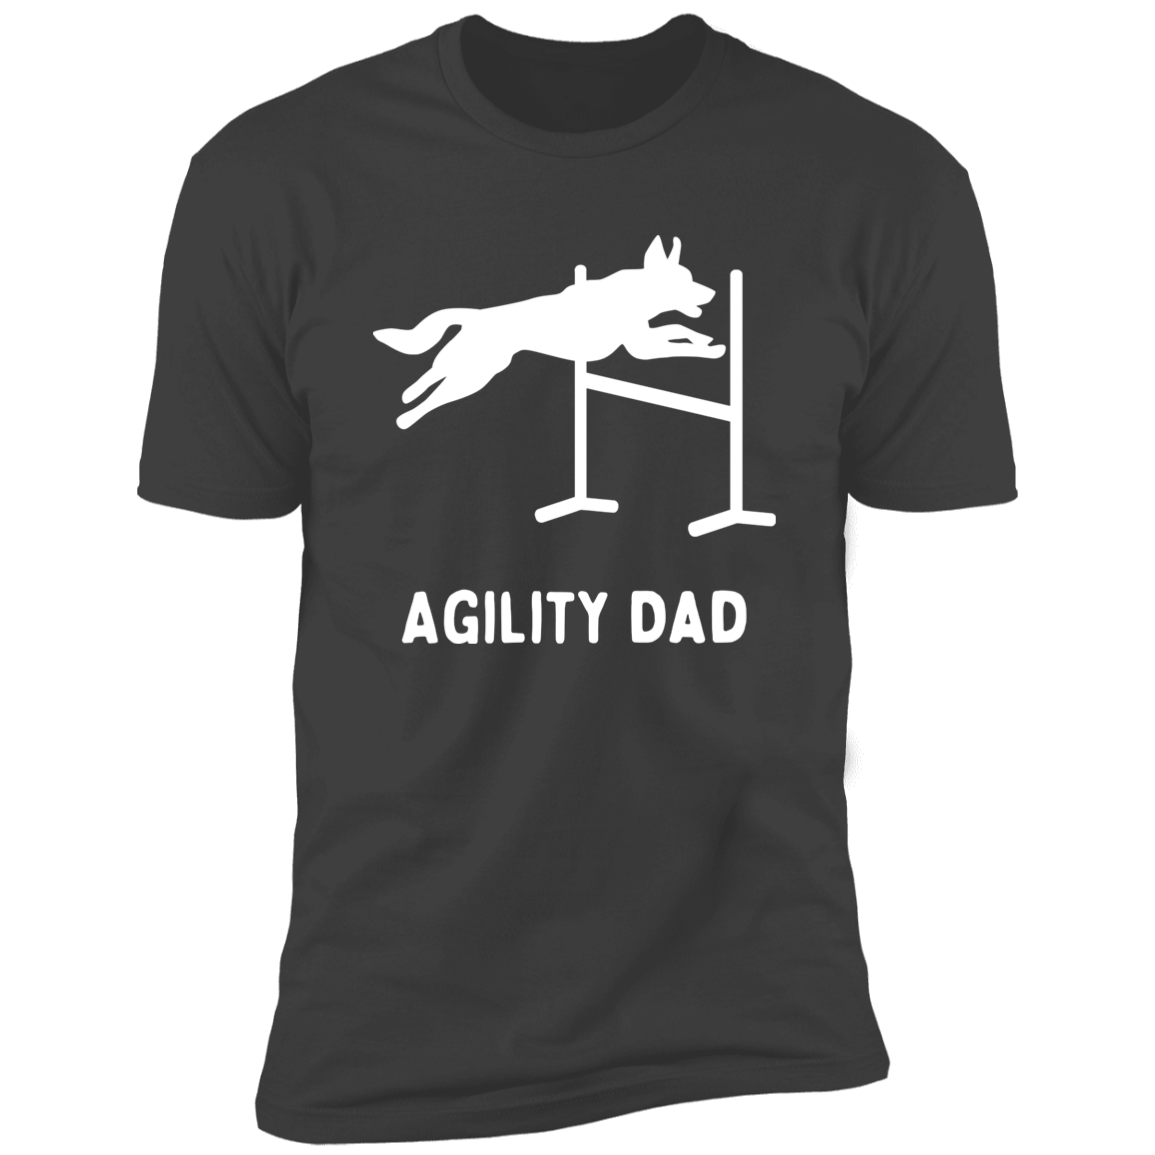 Agility Dad Agility Dog Dog T-Shirt for humans, in heavy metal gray